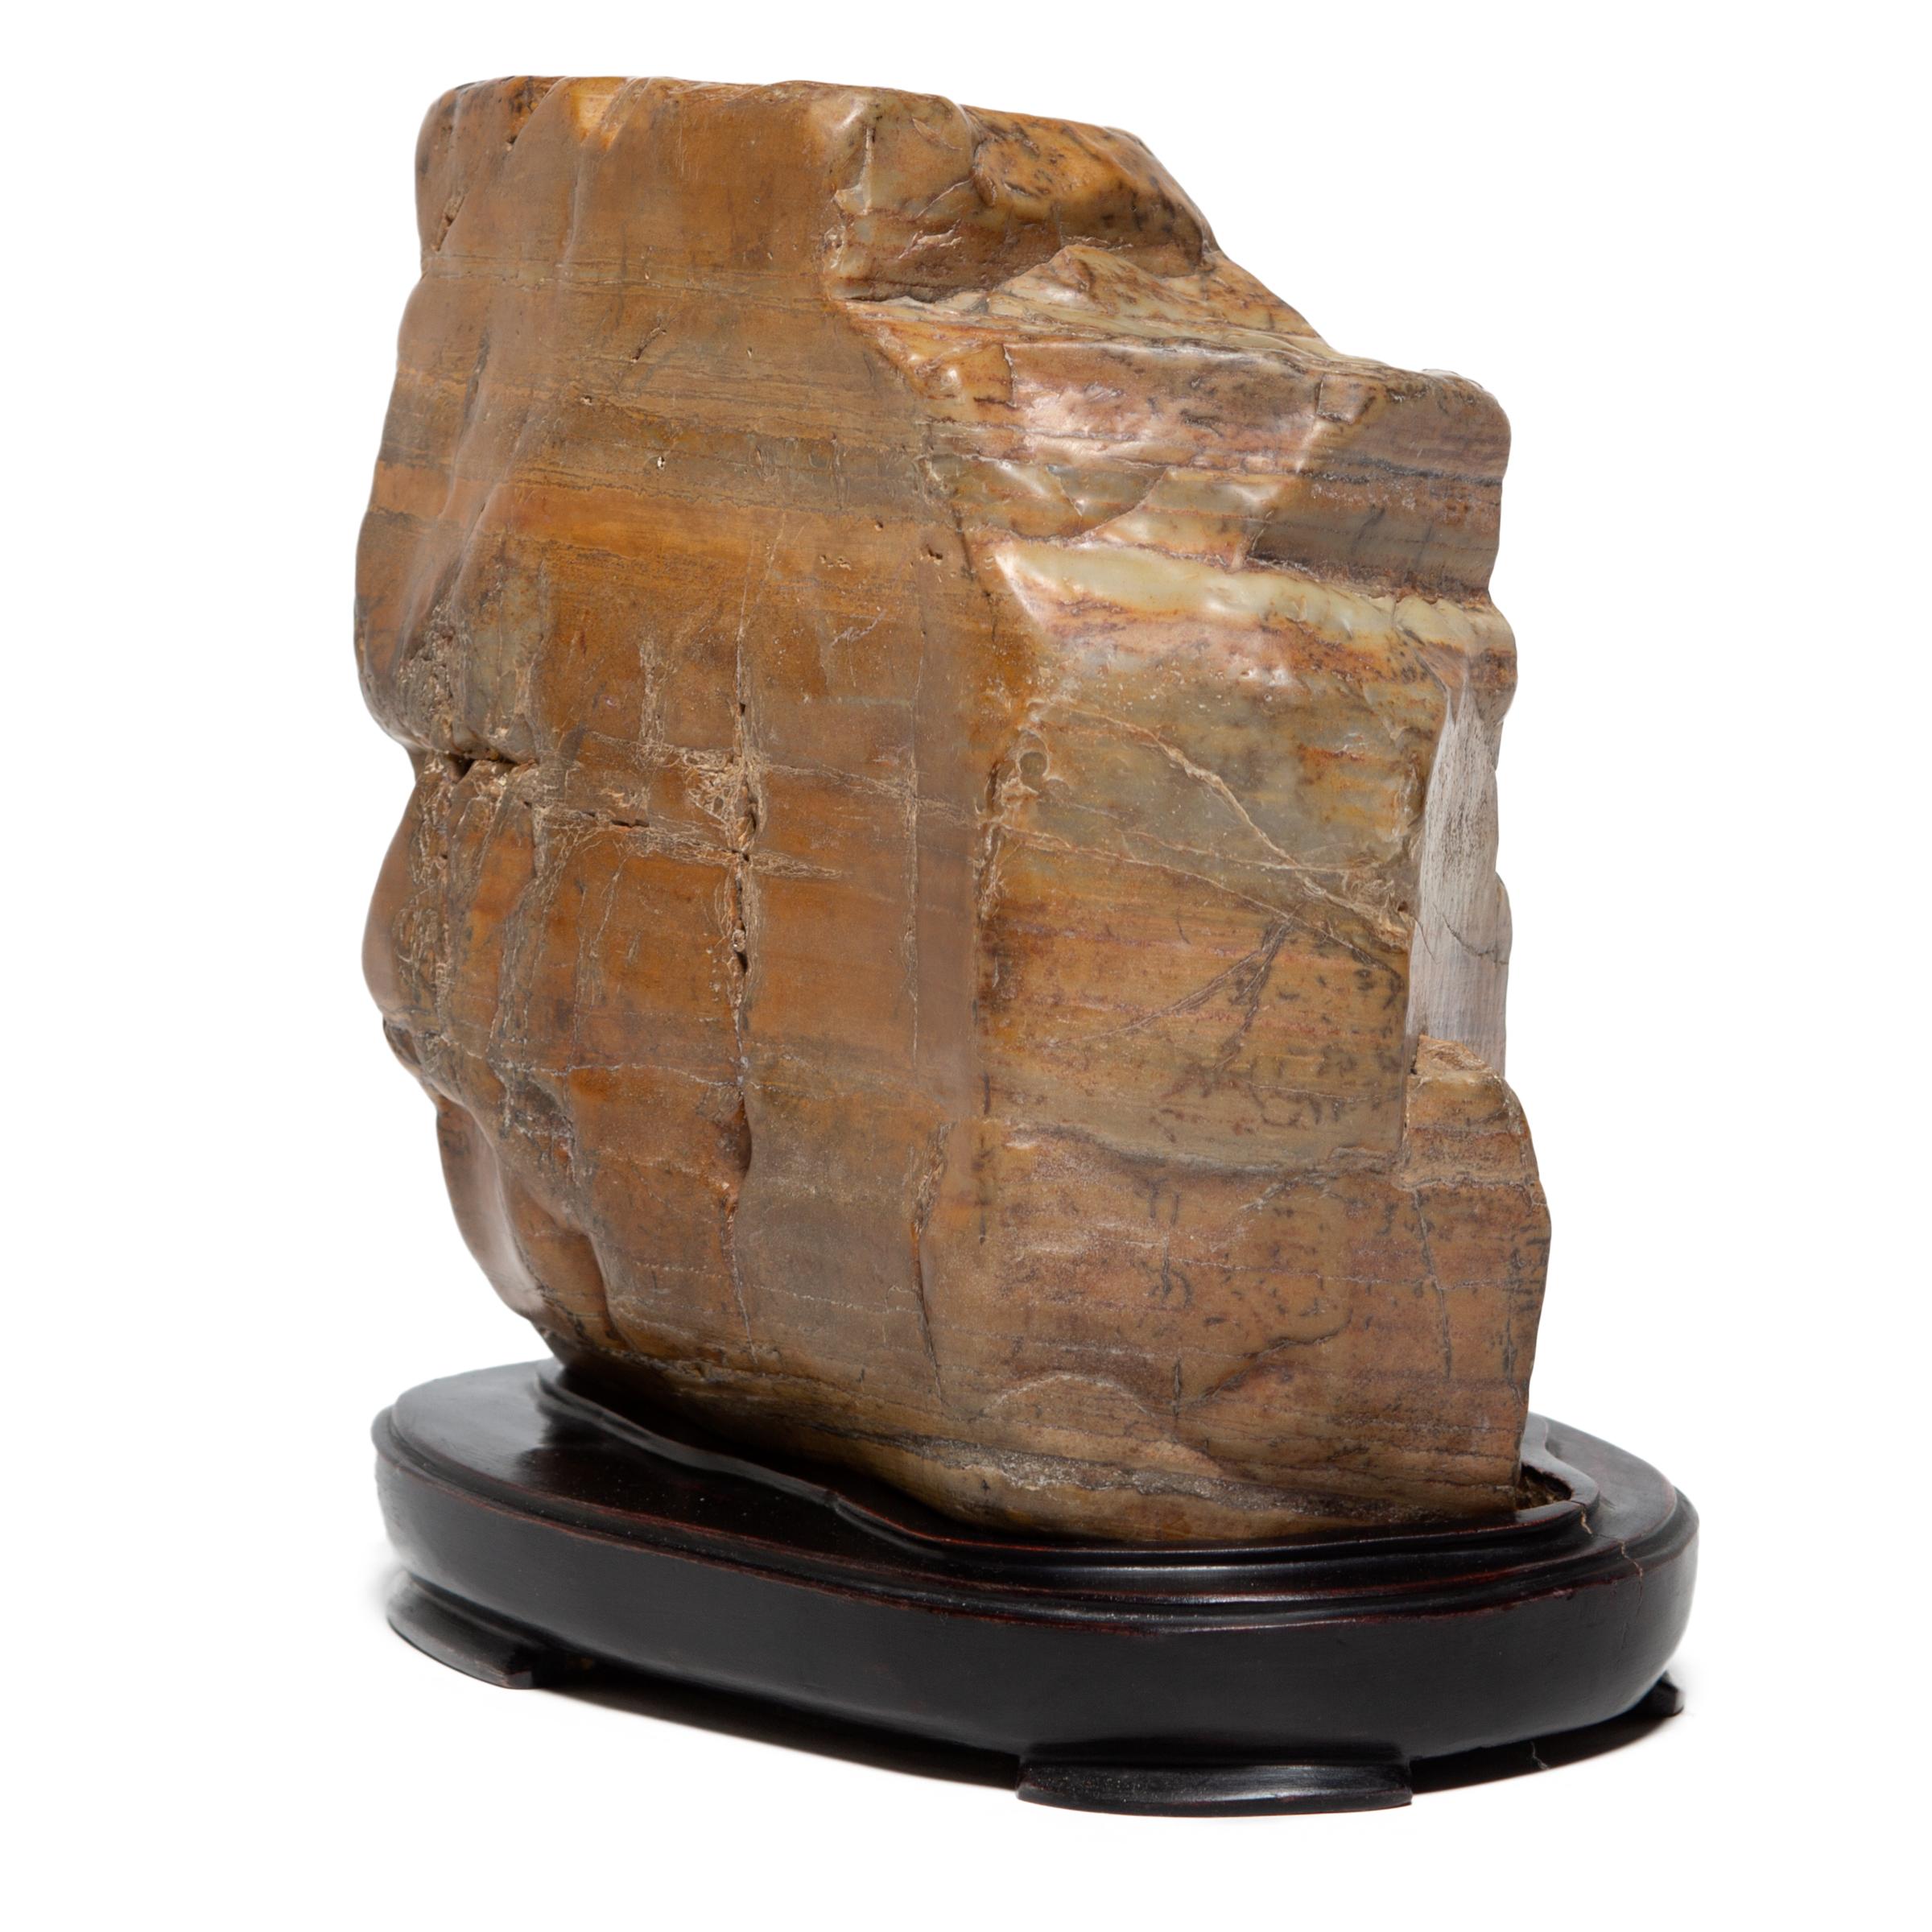 Elevated on a wood base, this mesmerizing dahua stone is displayed like a traditional scholars' rock. Meditating on the stone’s intriguing, irregular composition, the scholar found inspiration in the stone’s complex layering as a microcosm of the